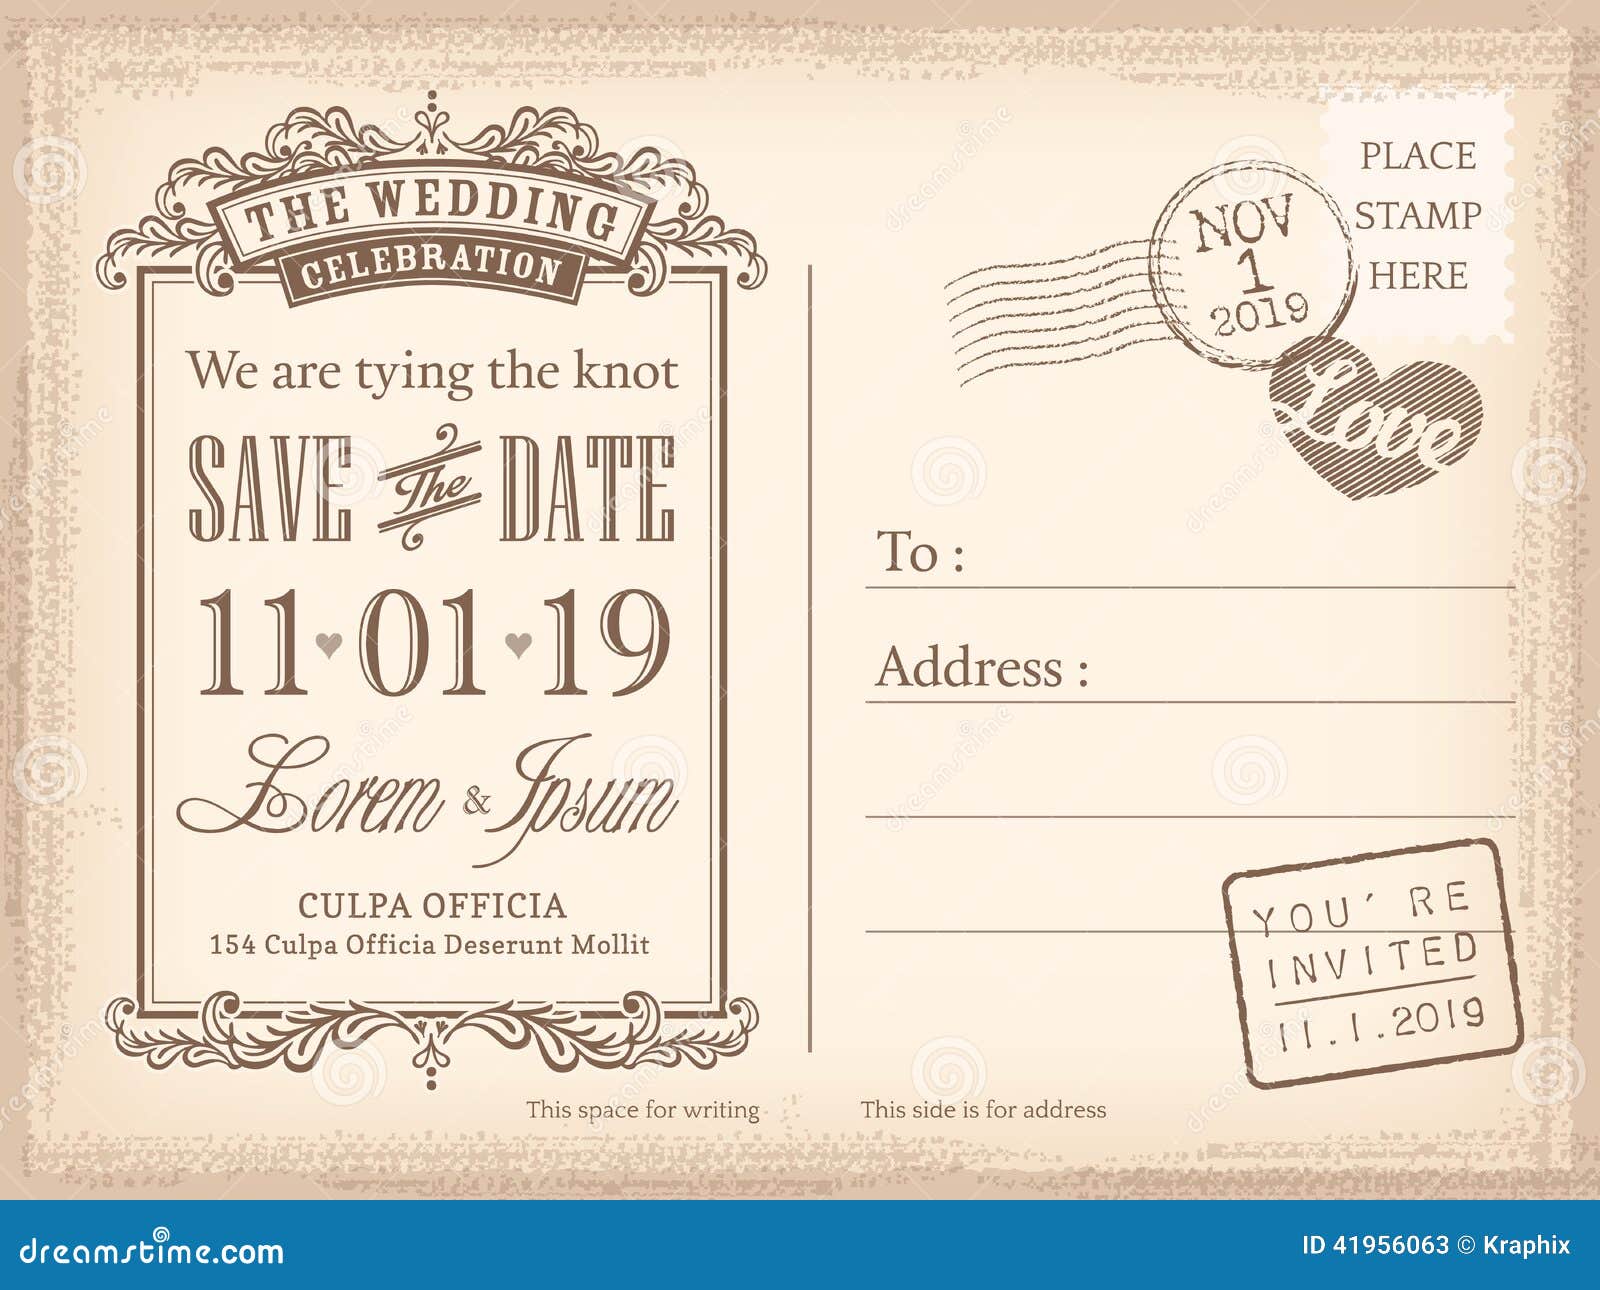 Wedding invitations without save the date